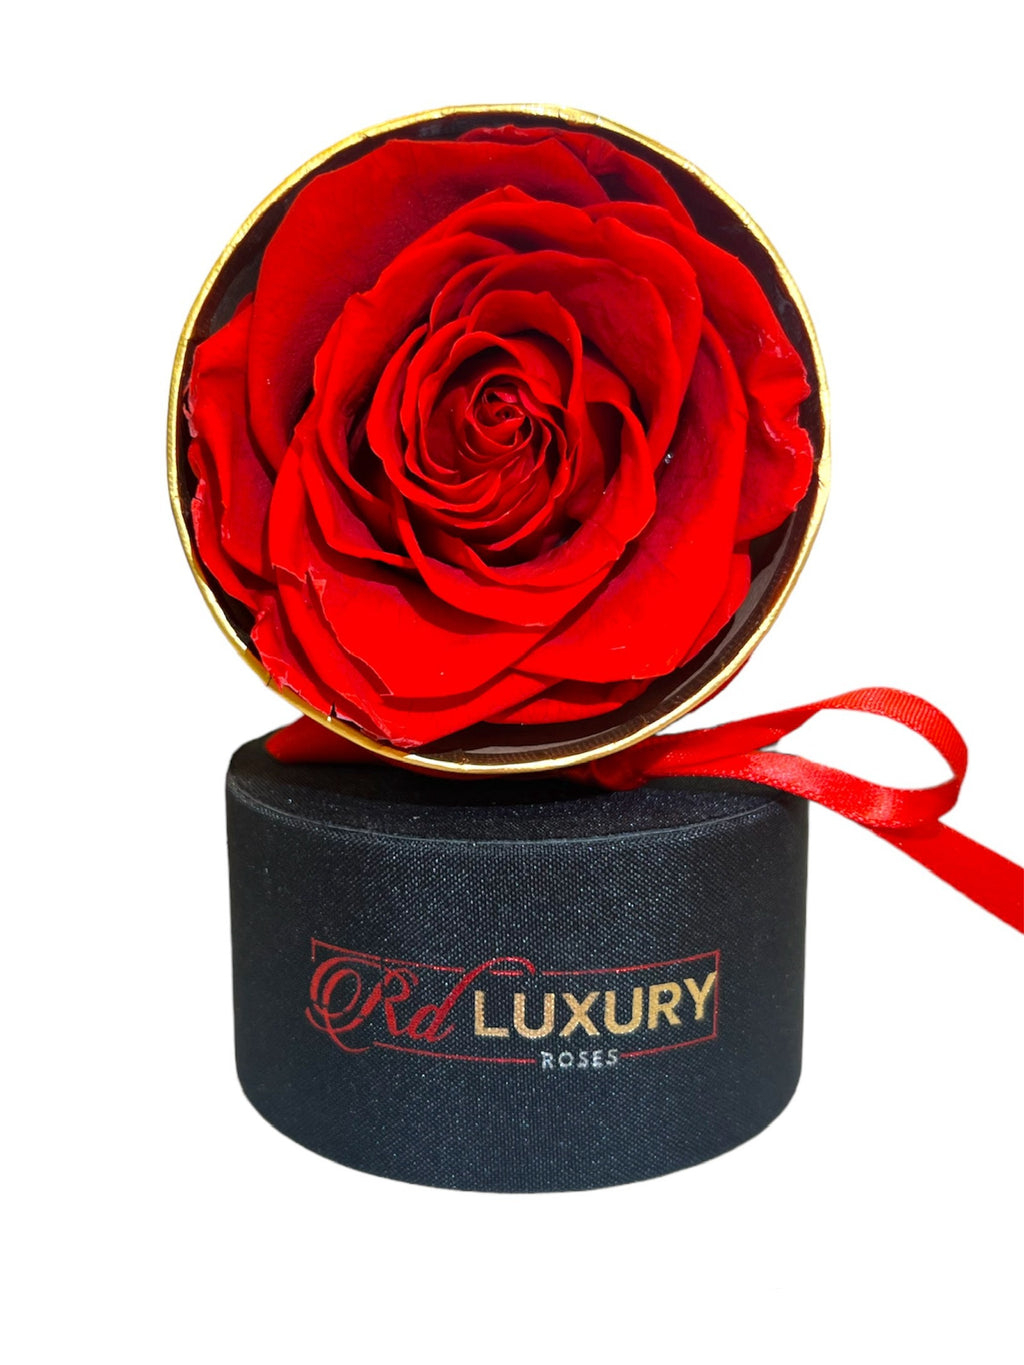 SMALL RD LUXURY ROSES